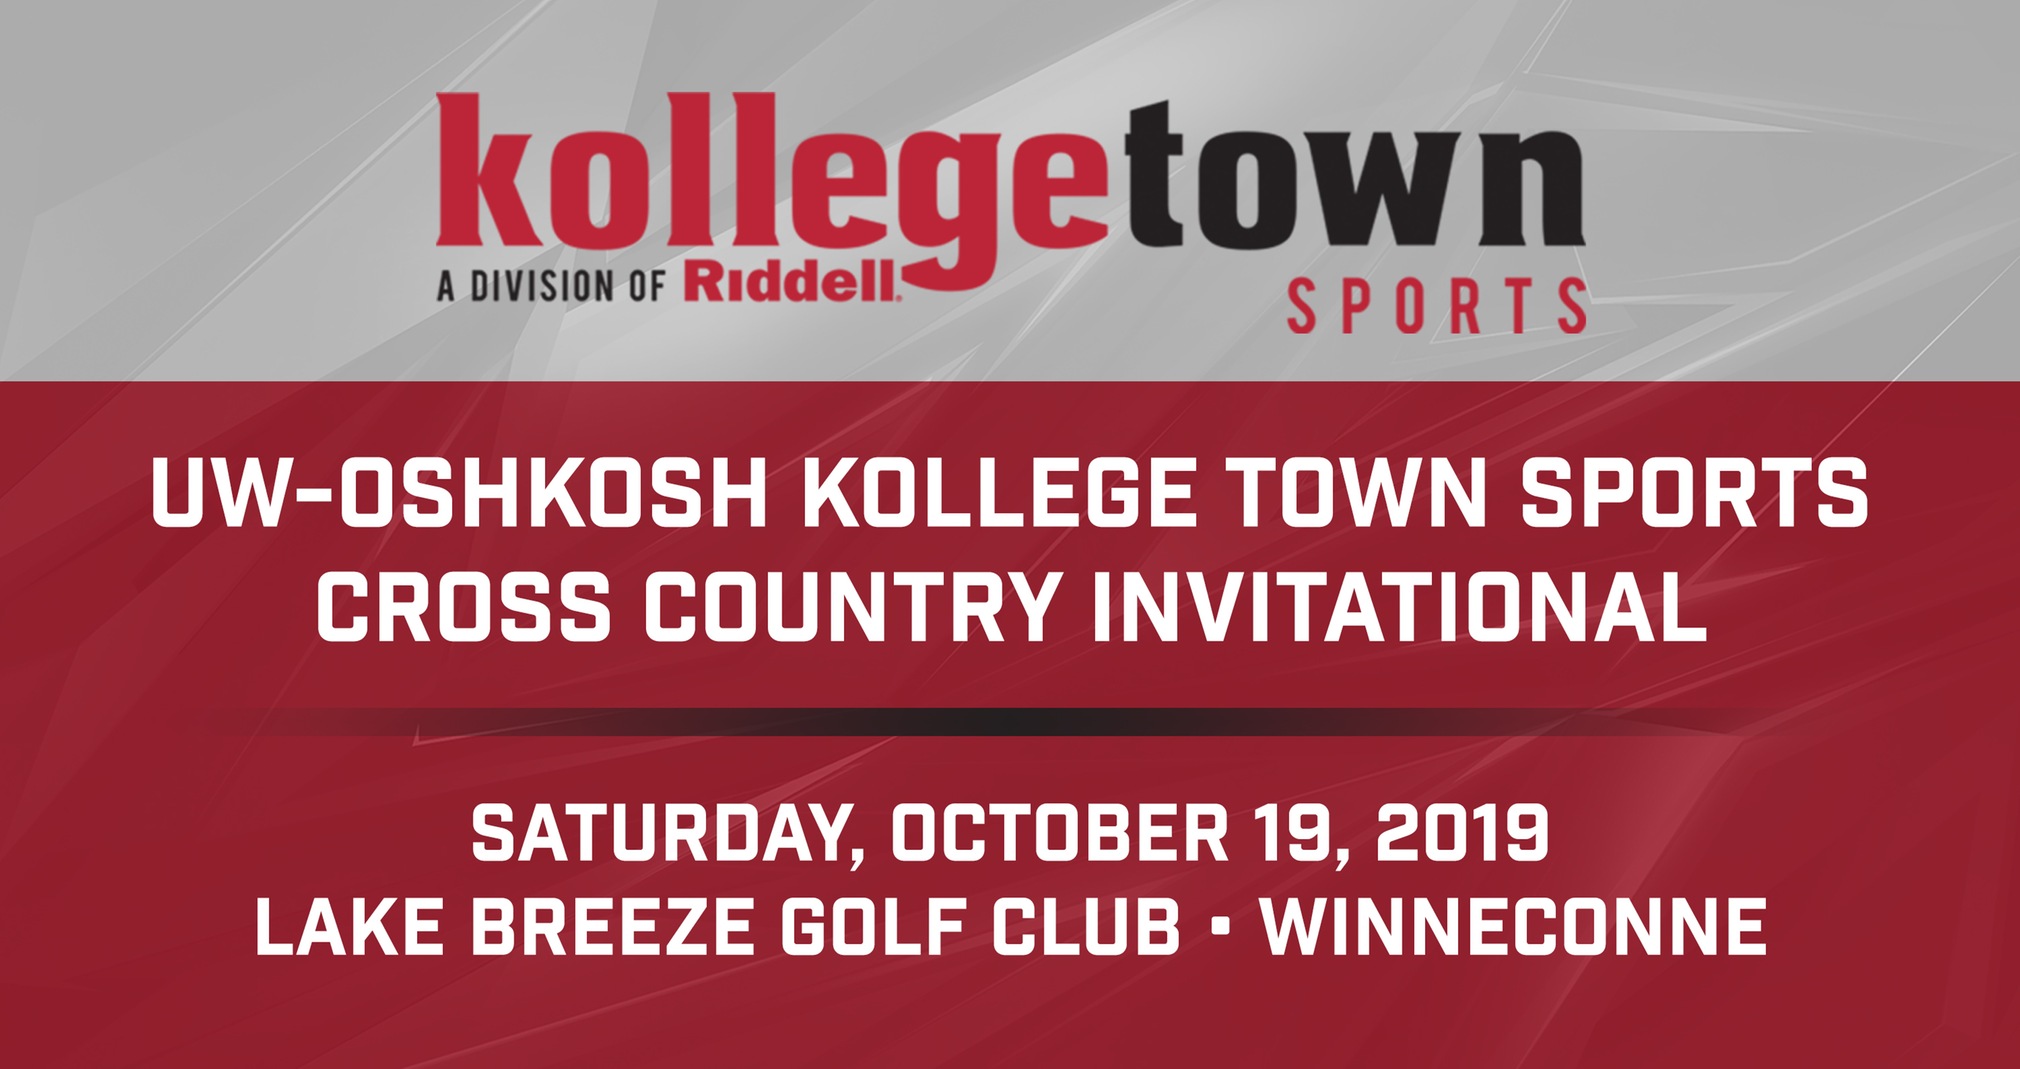 Nearly 75 Cross Country Programs To Be Represented At Kollege Town Sports Invitational